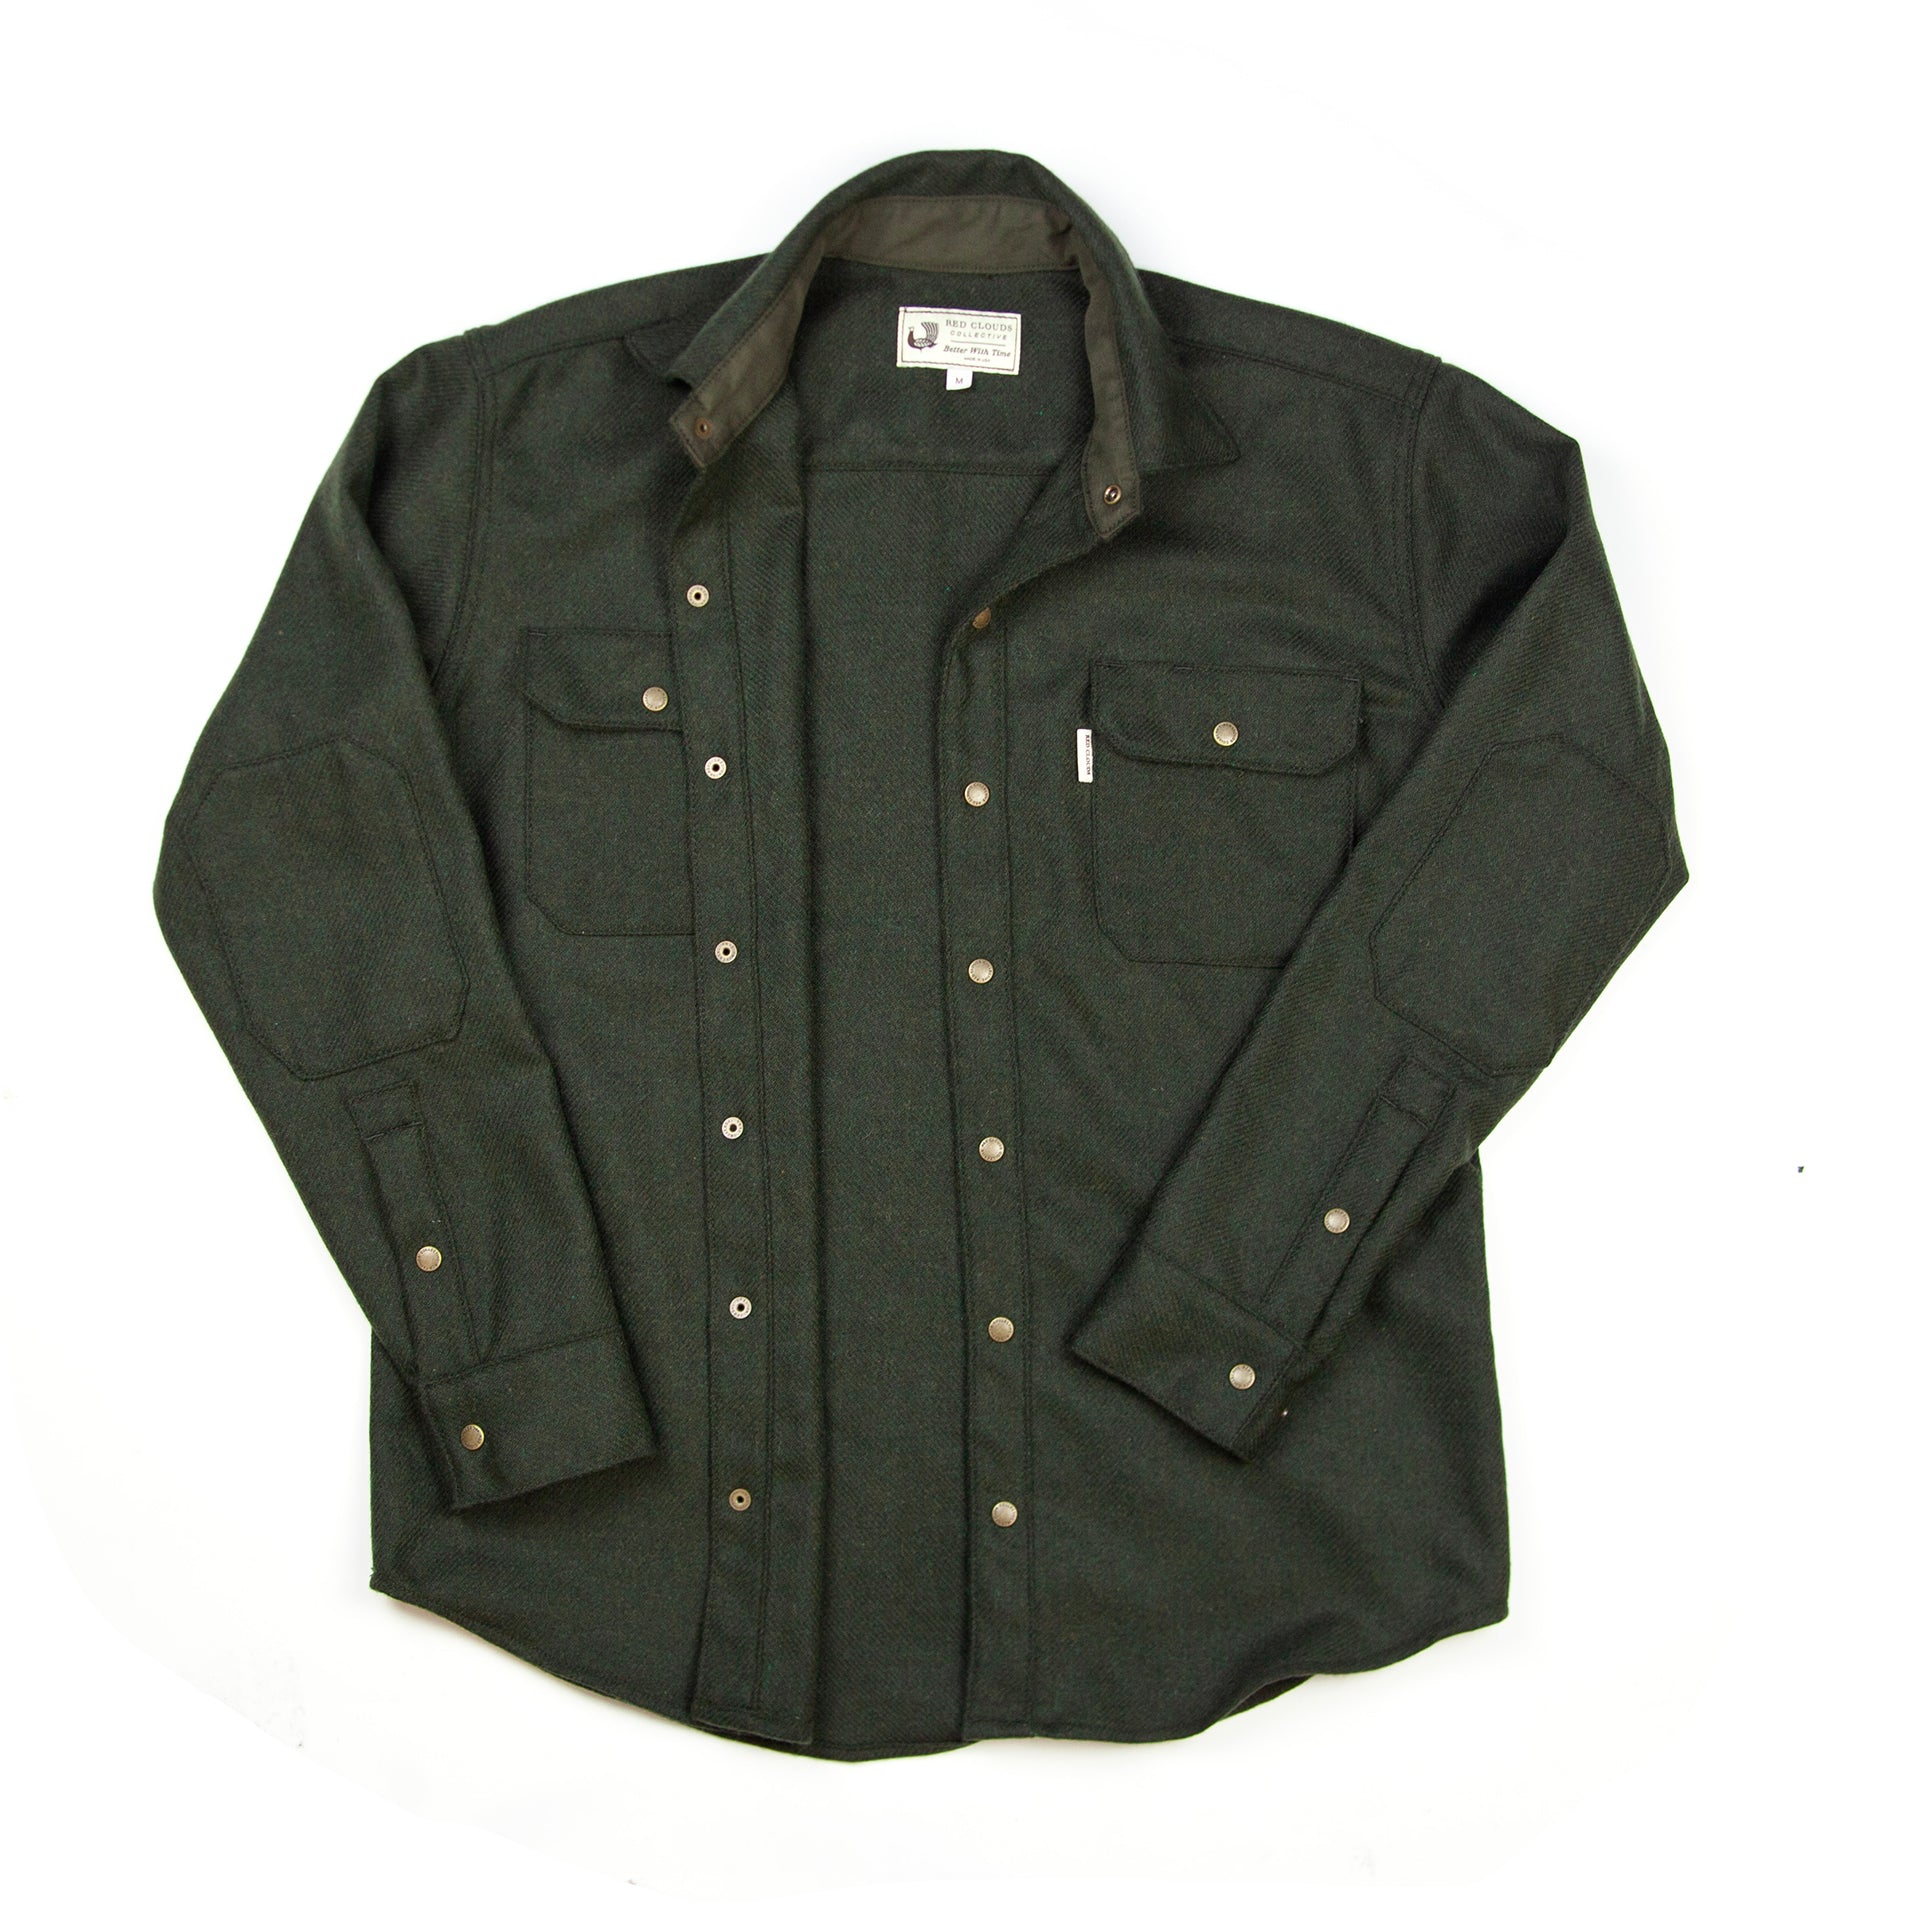 Witham Wool Shirt - Olive